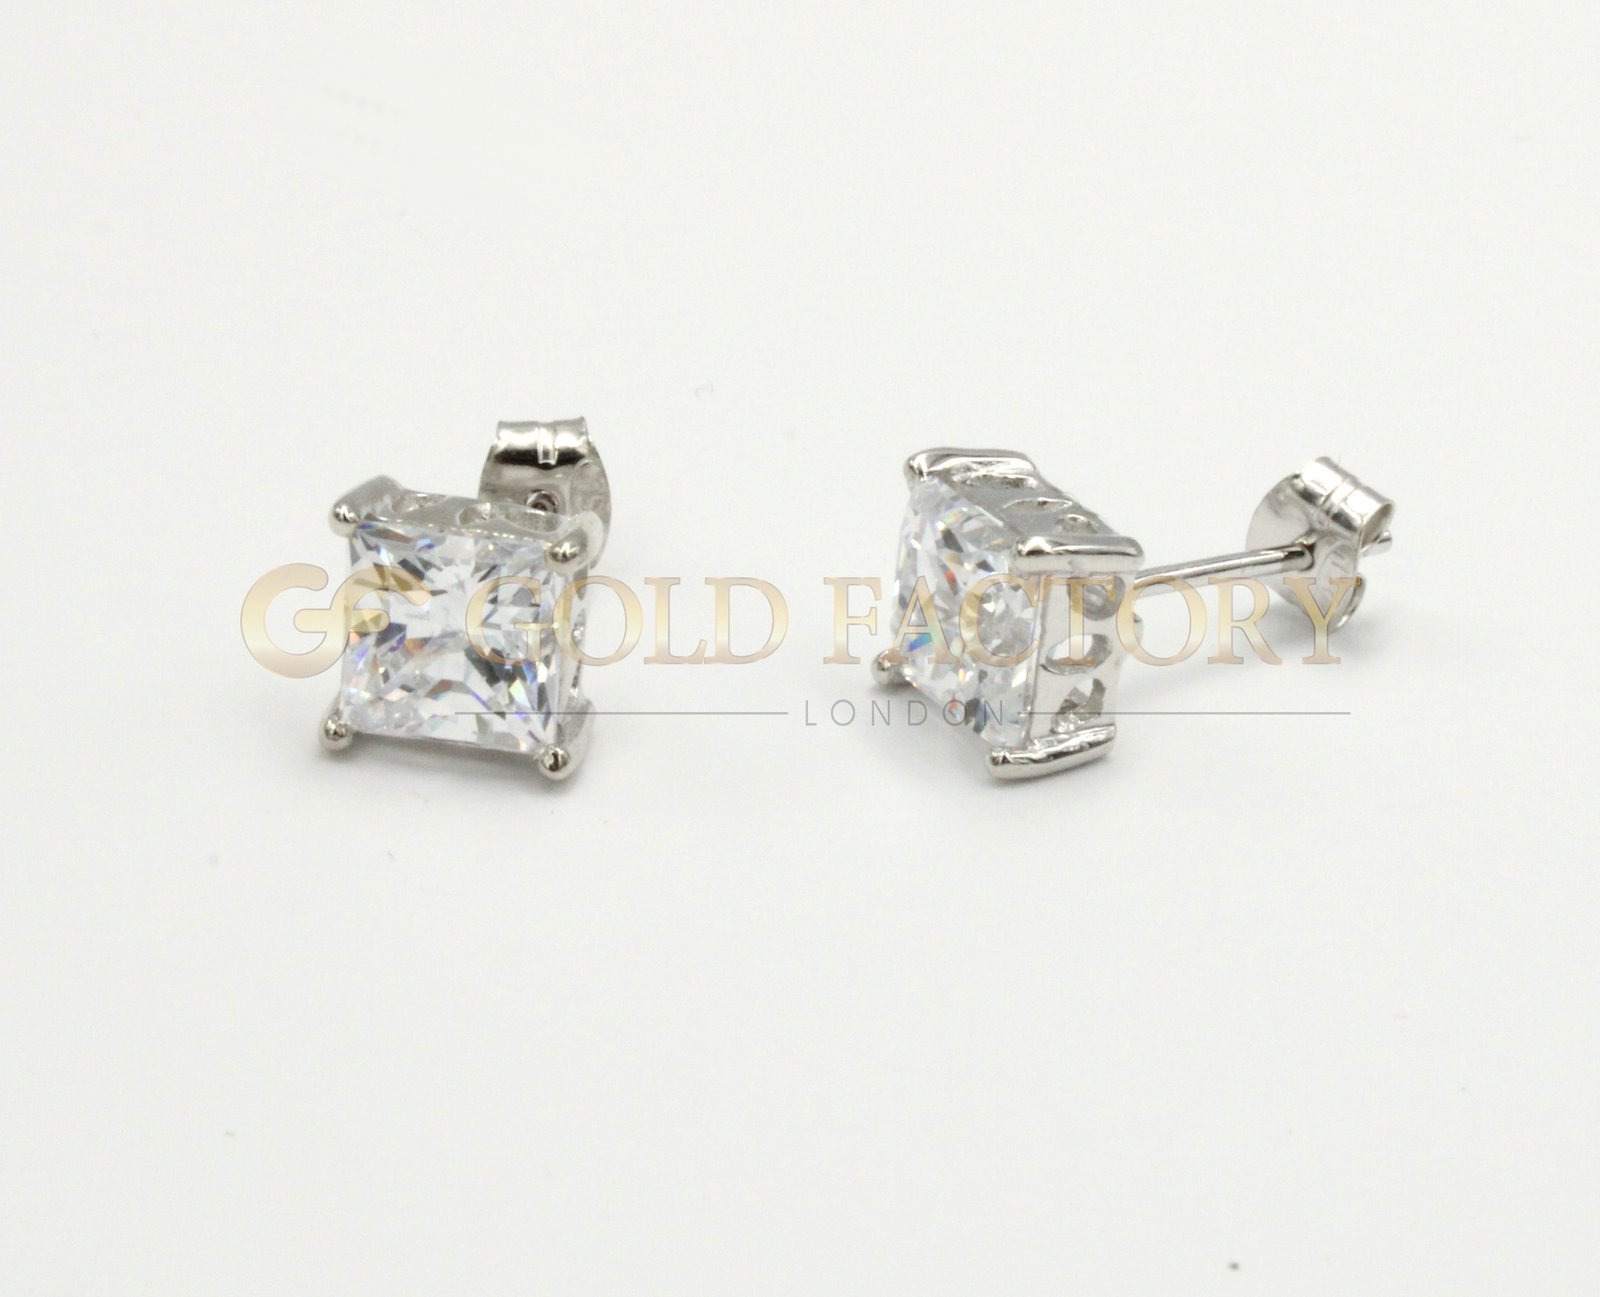 Pair of Lovely White Metal Studs